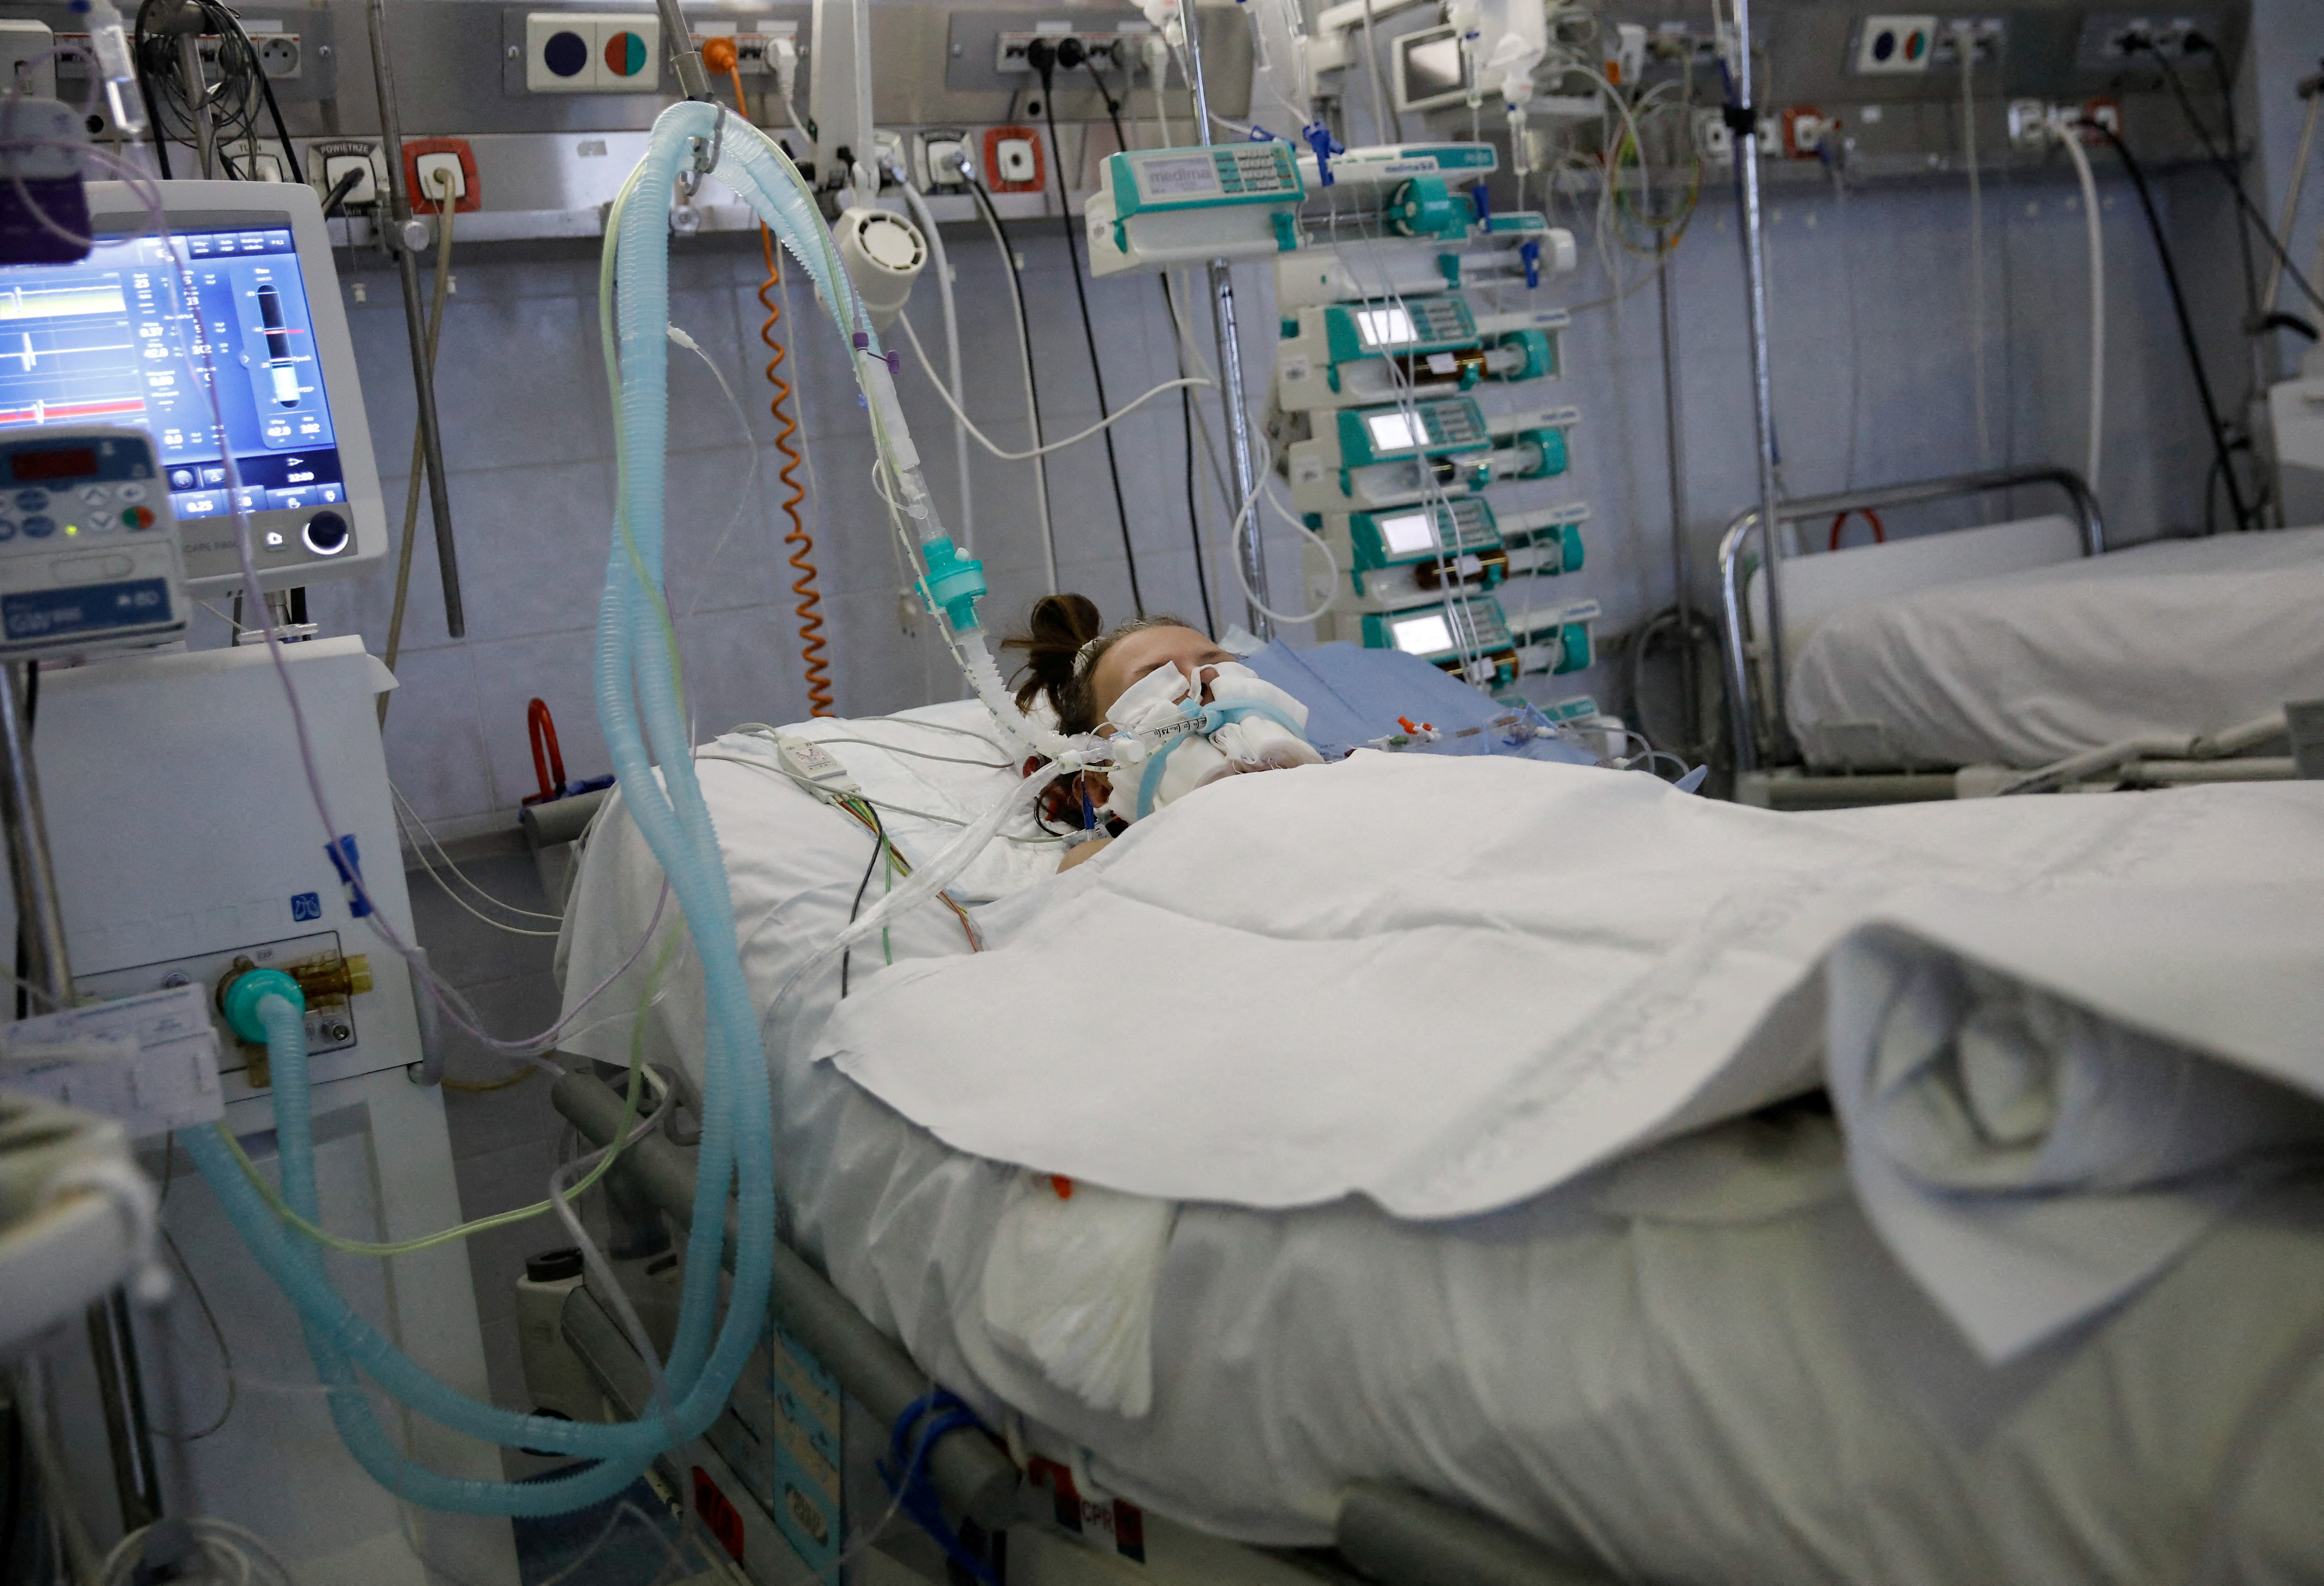 A patient lies intubated on the coronavirus disease (COVID-19) ward at the Central Clinical Hospital of the Ministry of Interior and Administration in Warsaw, Poland, January 11, 2022. REUTERS/Kacper Pempel/File Photo